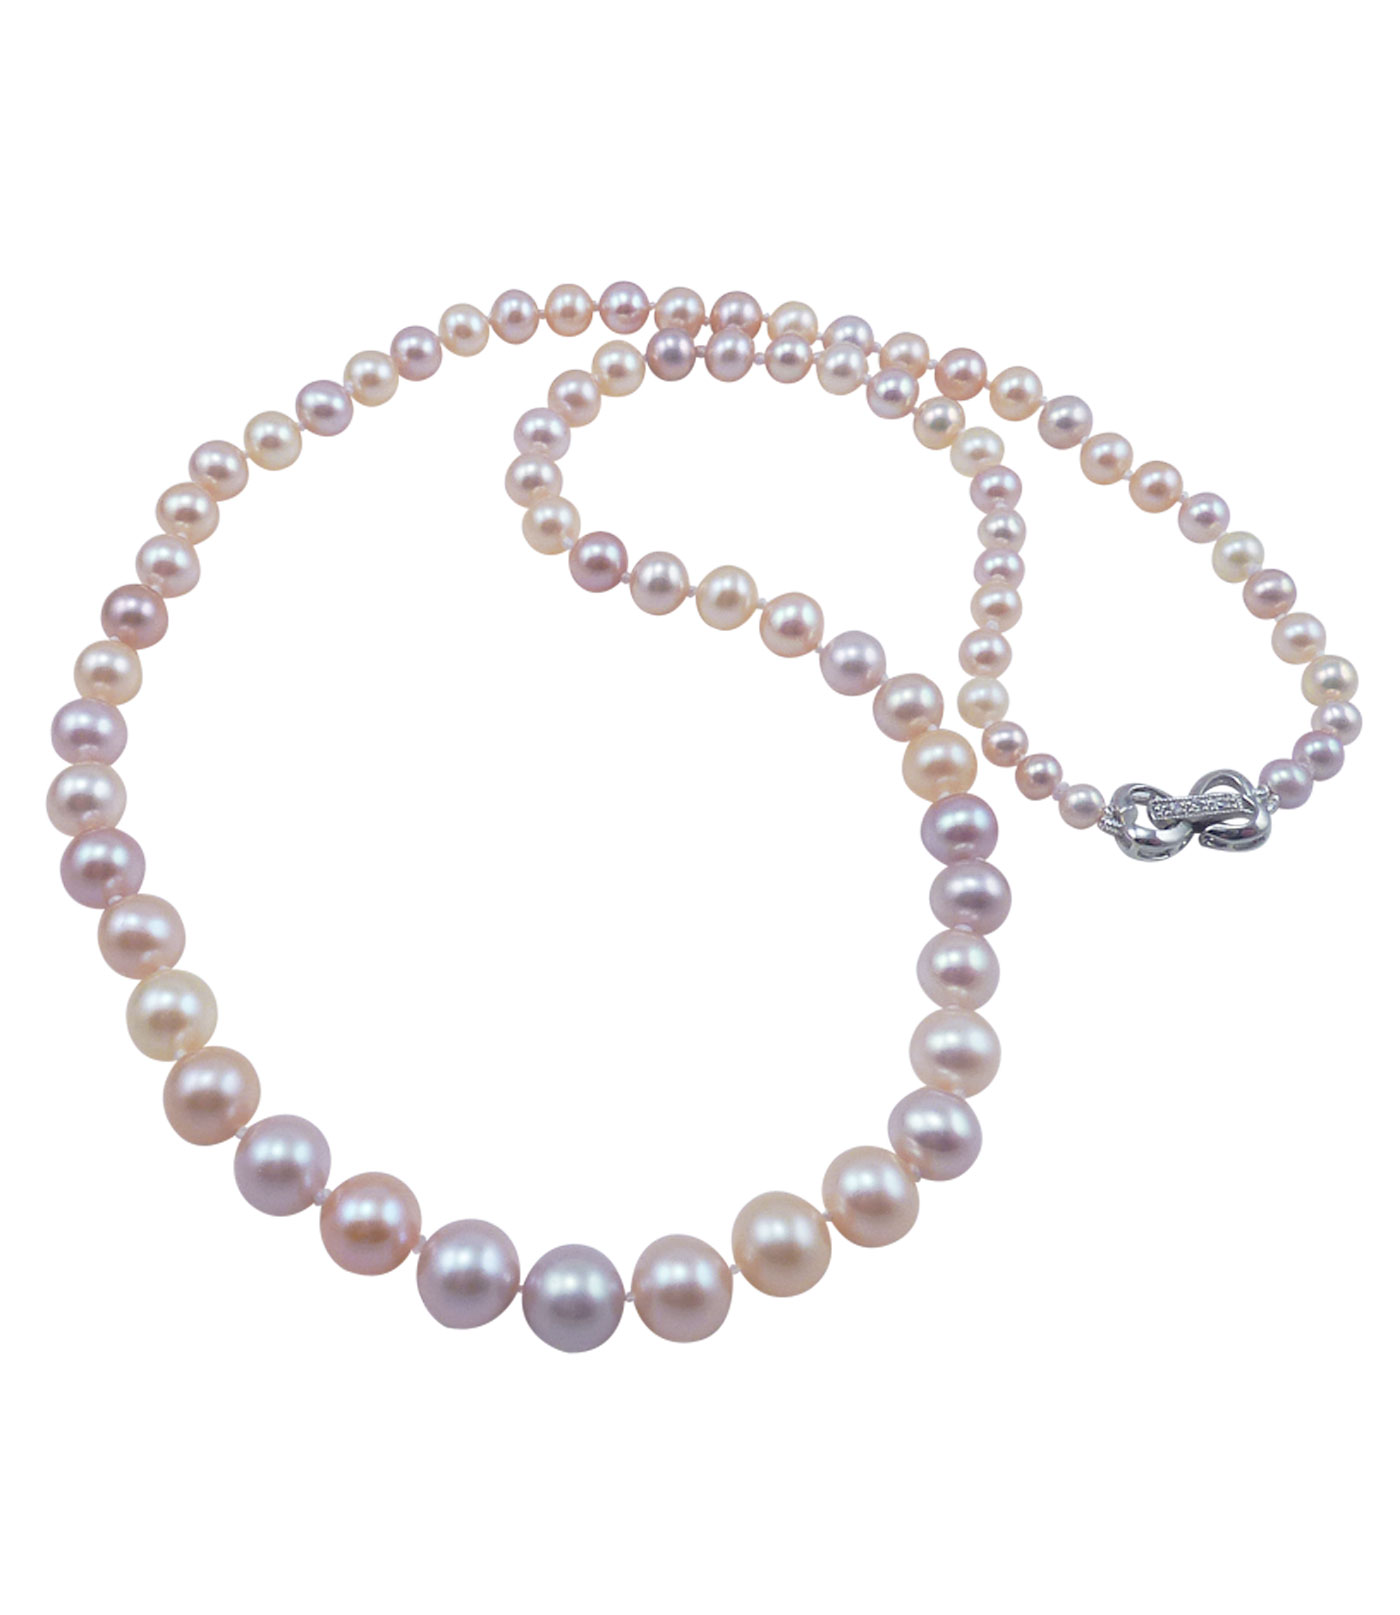 Delicate graduated pink pearl necklace. Contemporary elegance